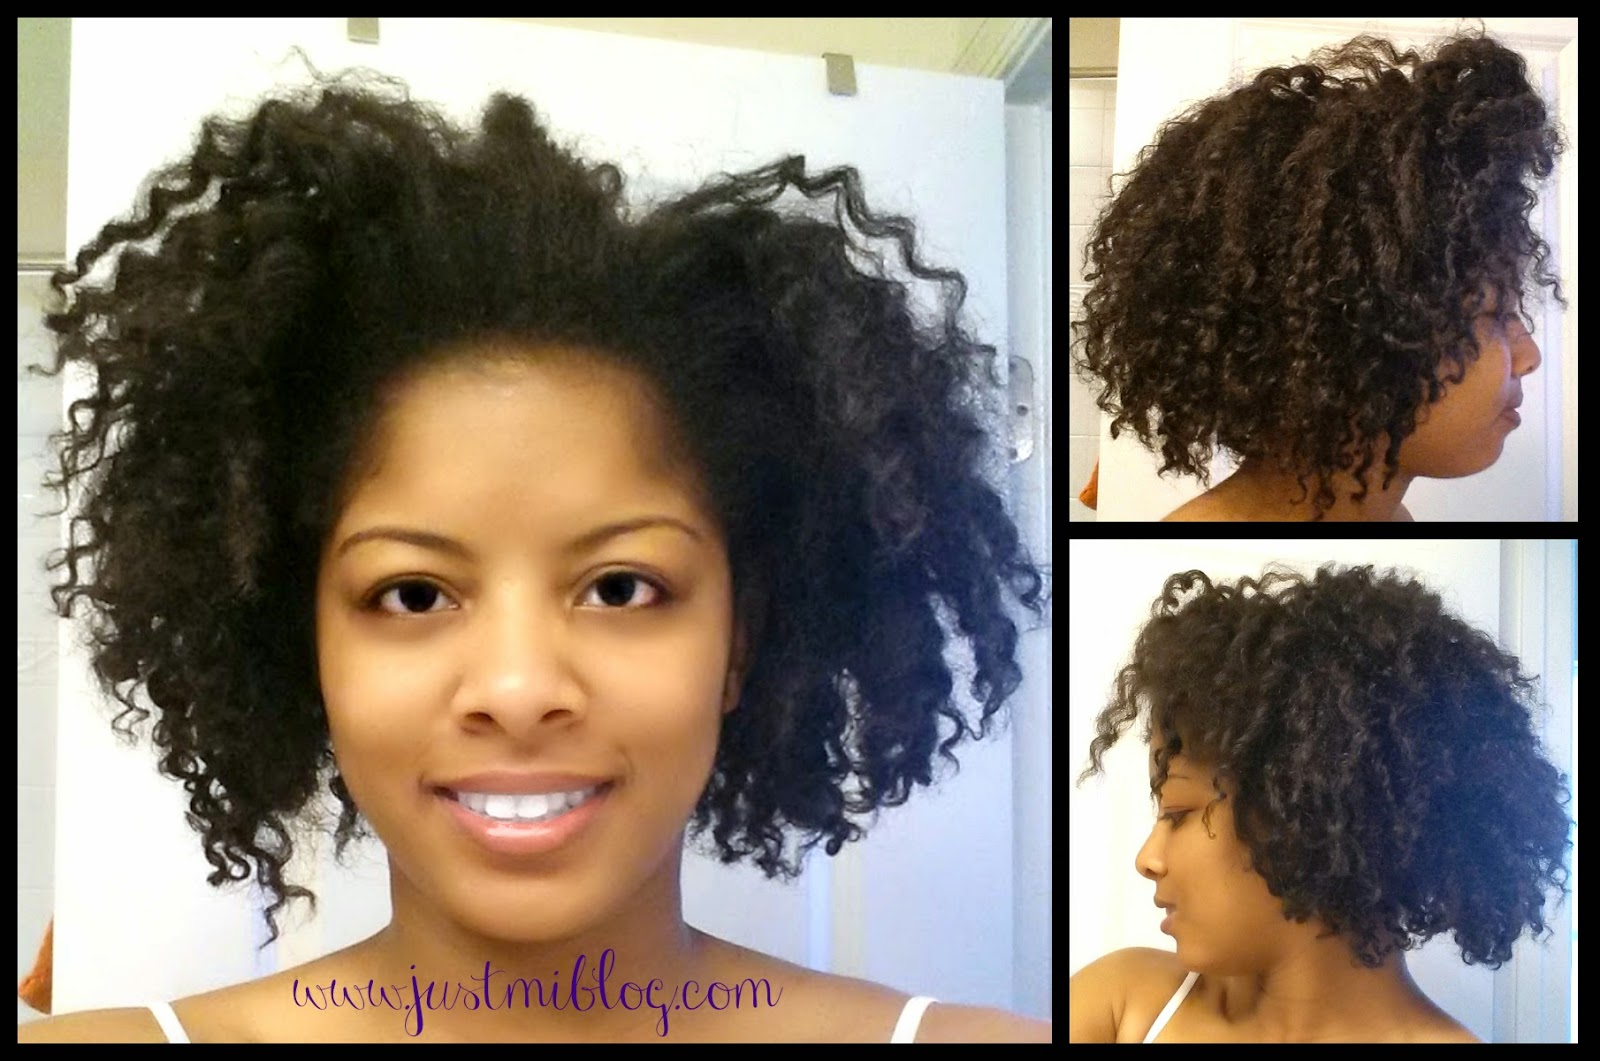 My natural hair before my wash and go trial.